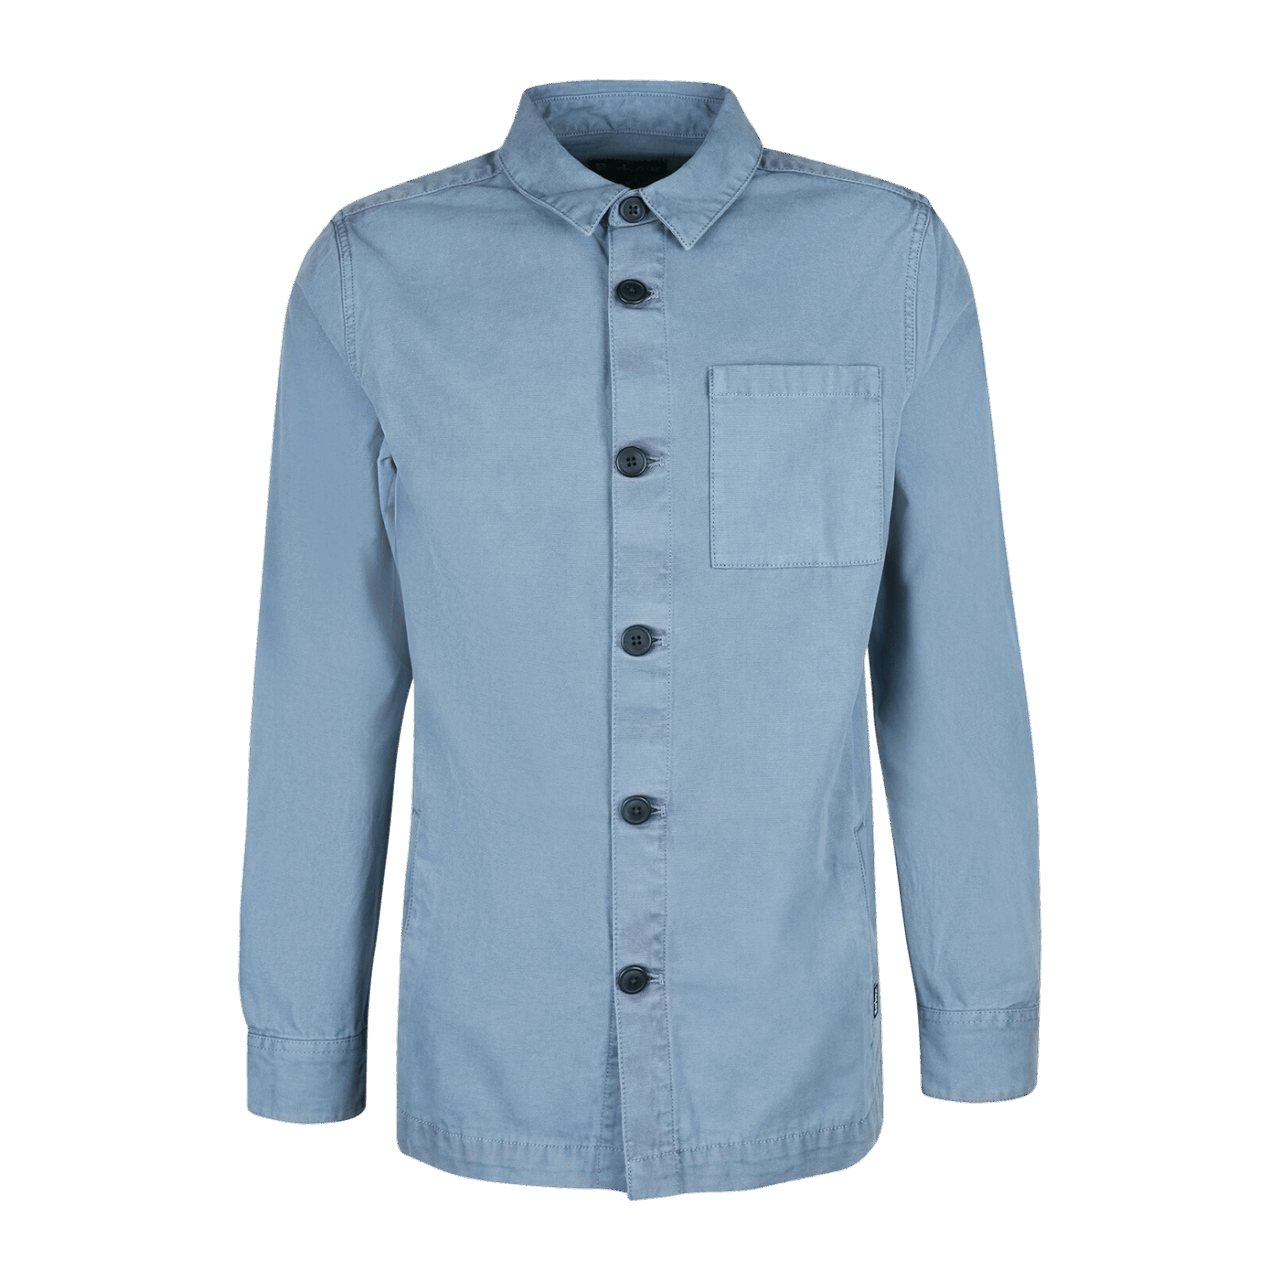 Barbour Overshirt Washed Cotton - blue